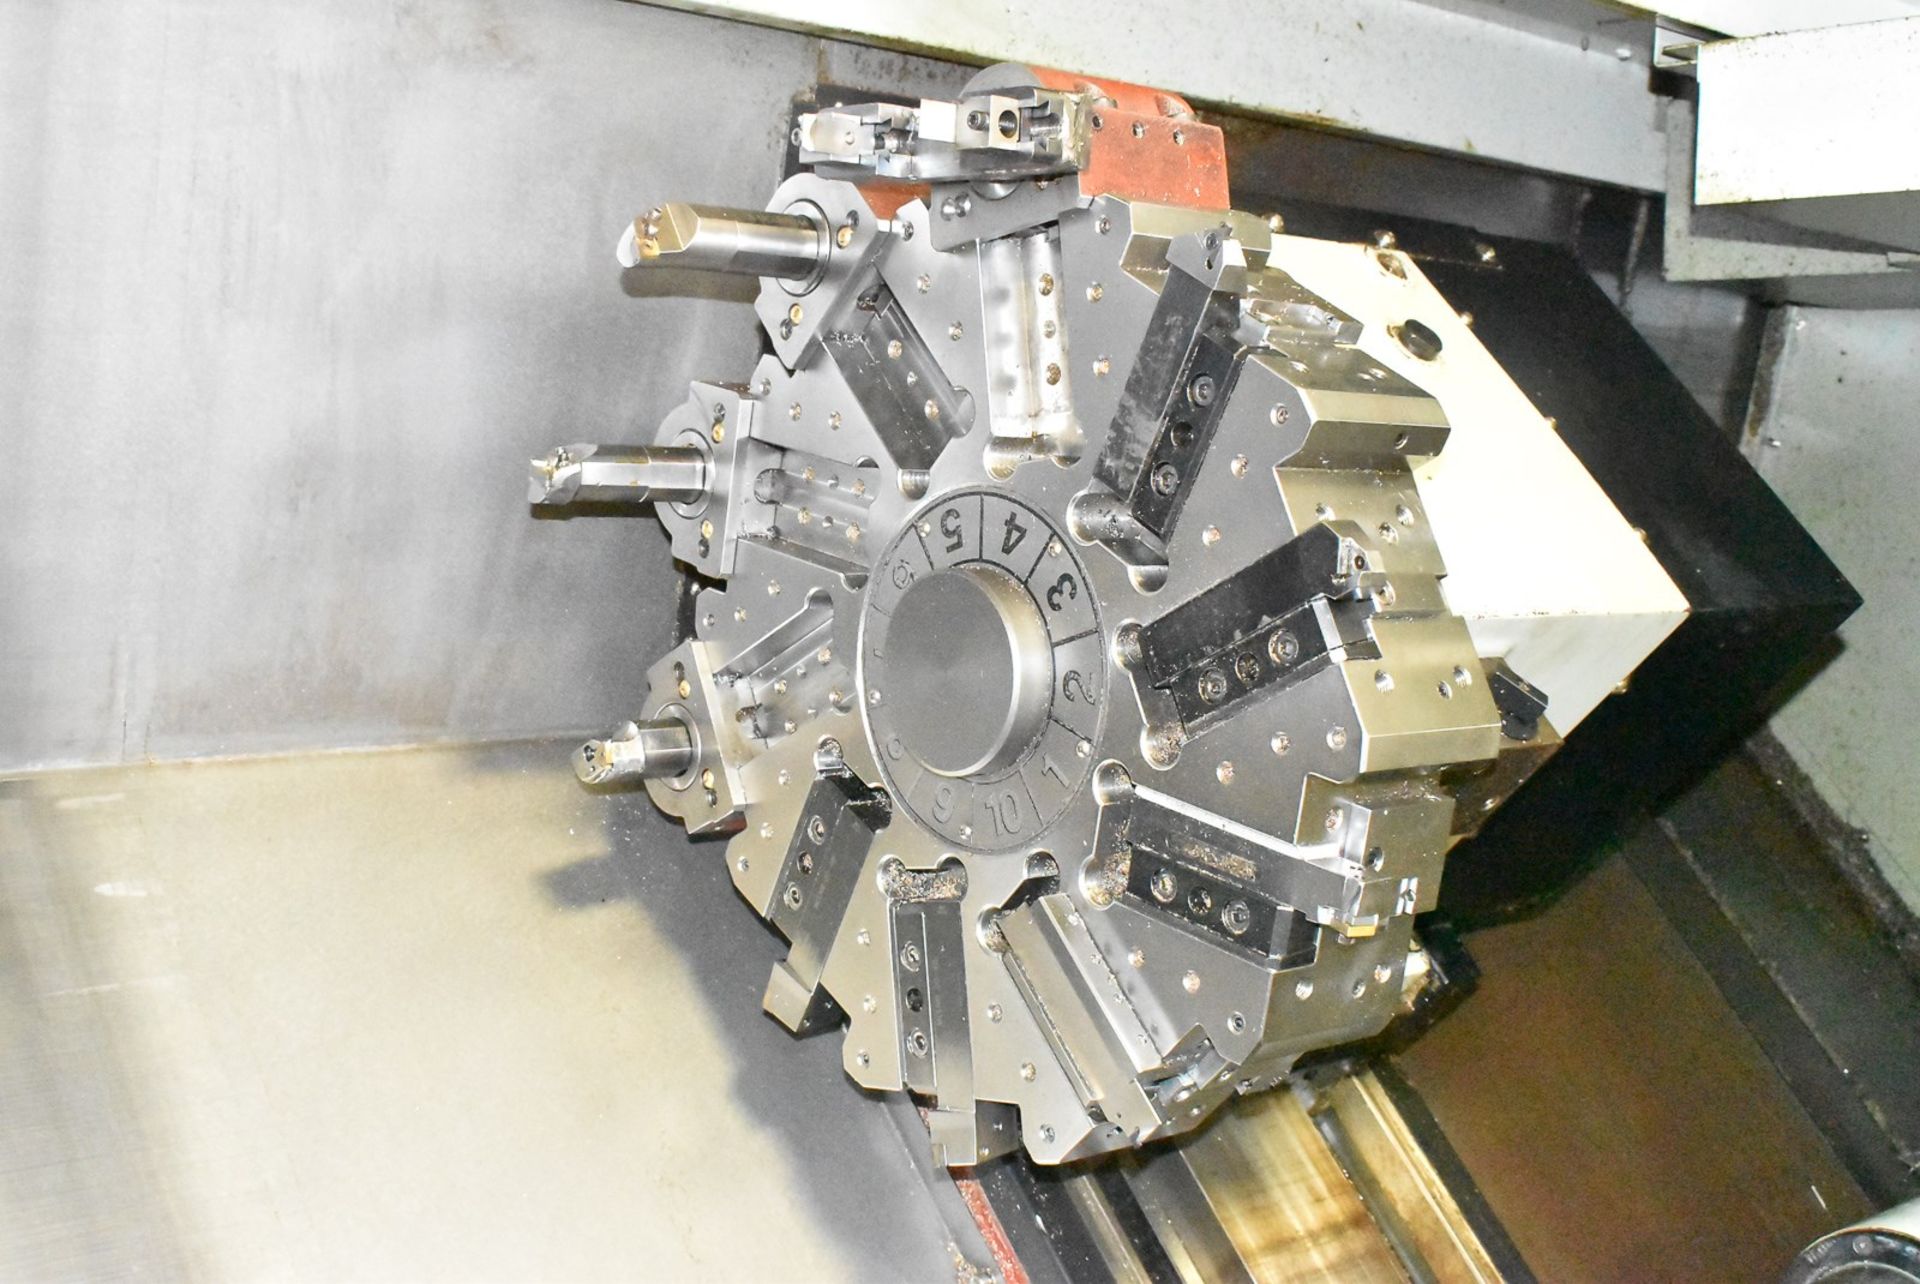 21.65"x35" Victor (Fortune) Model VTurn-36 2-Axis CNC Turning Center Lathe, S/N MD-1636, New 2007 - Image 6 of 10